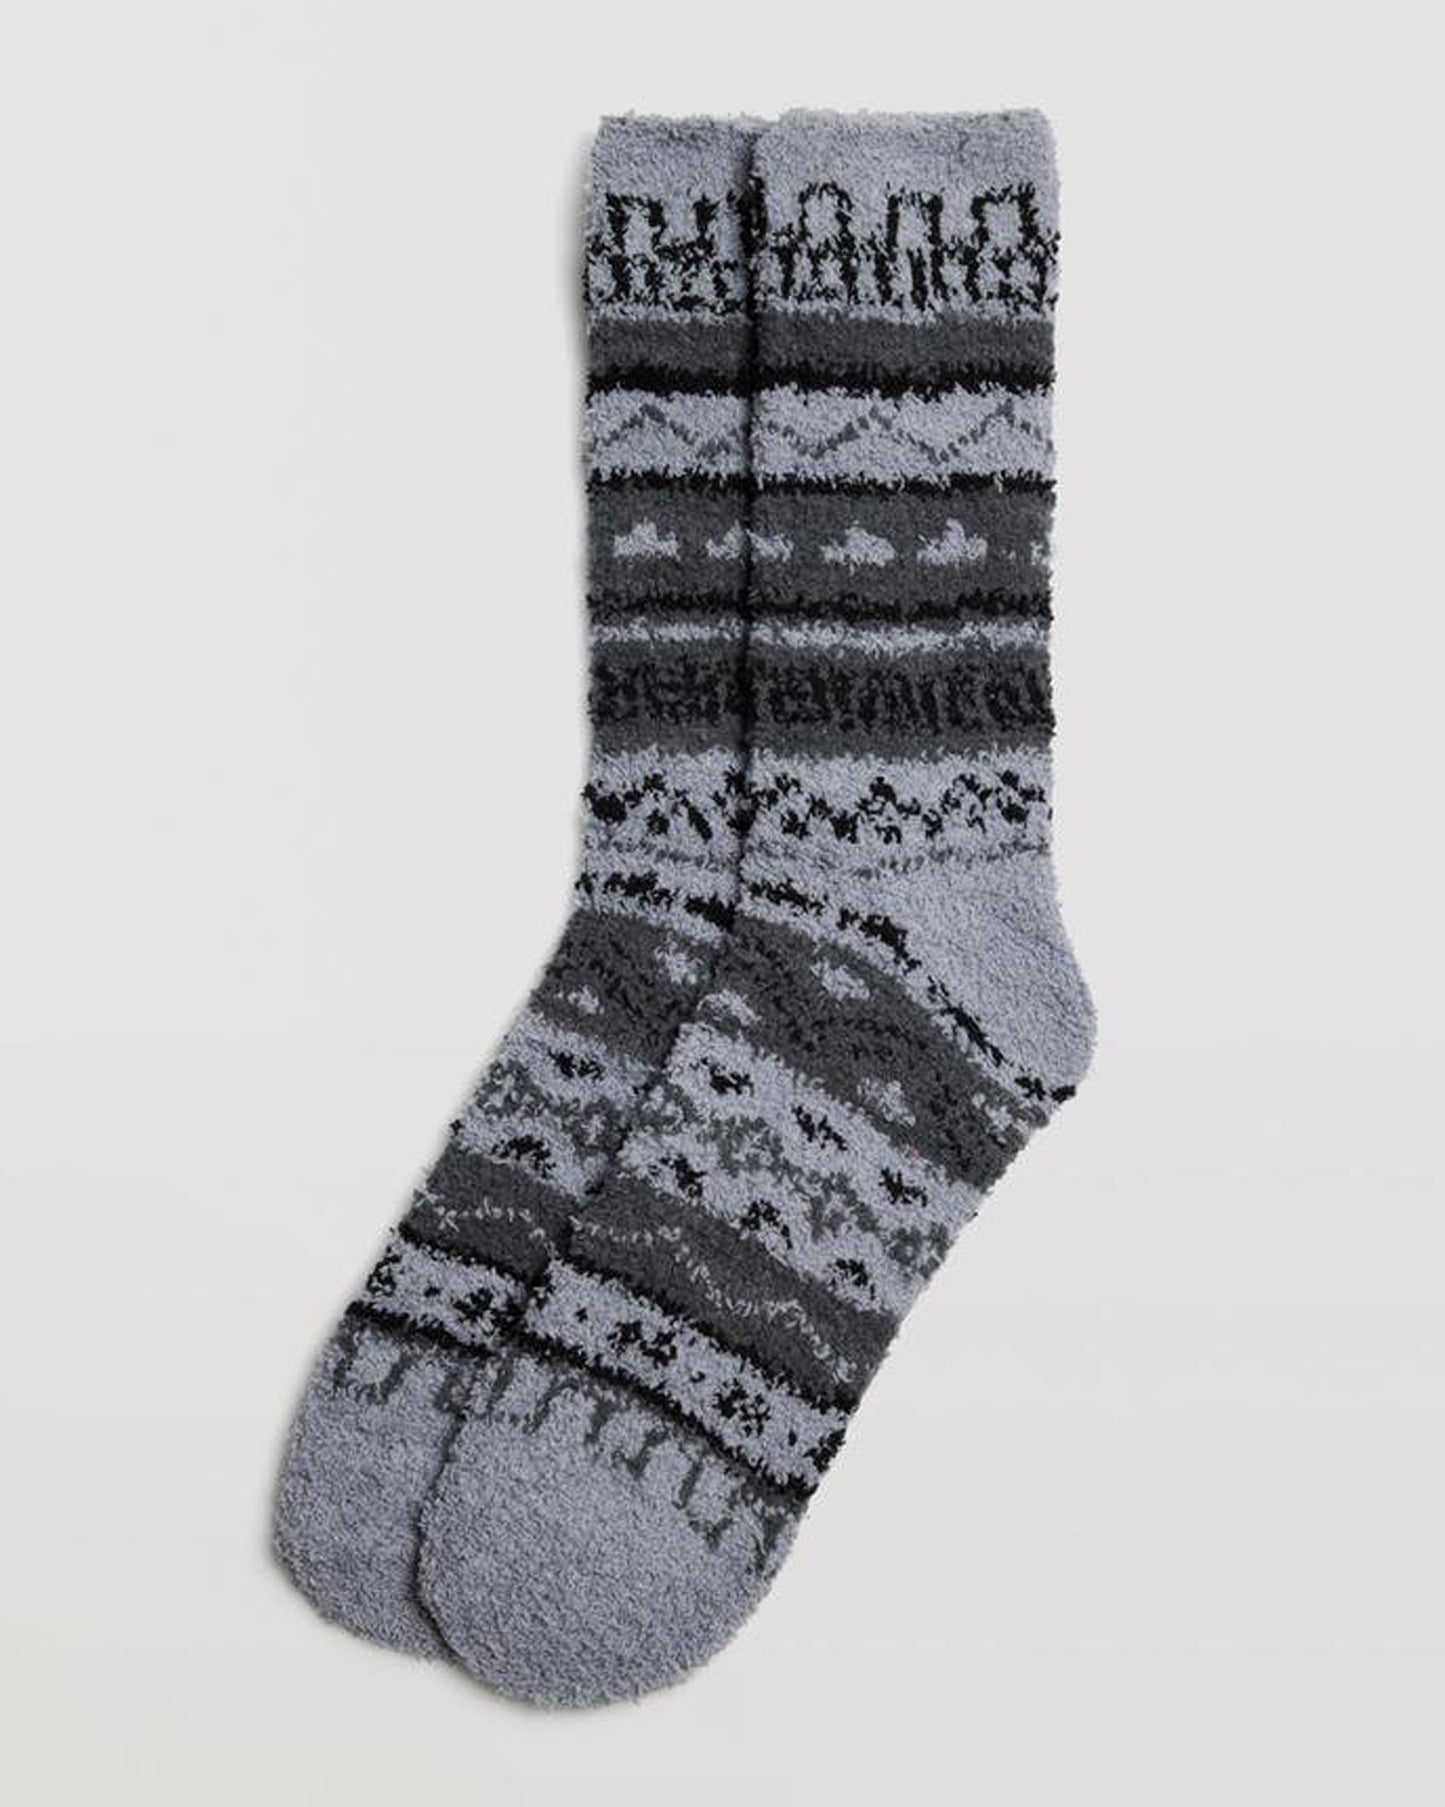 Ysabel Mora 22892 Aztec Flannel Socks - Soft and fluffy light grey Aztec style patterned house thermal socks in dark grey and black.